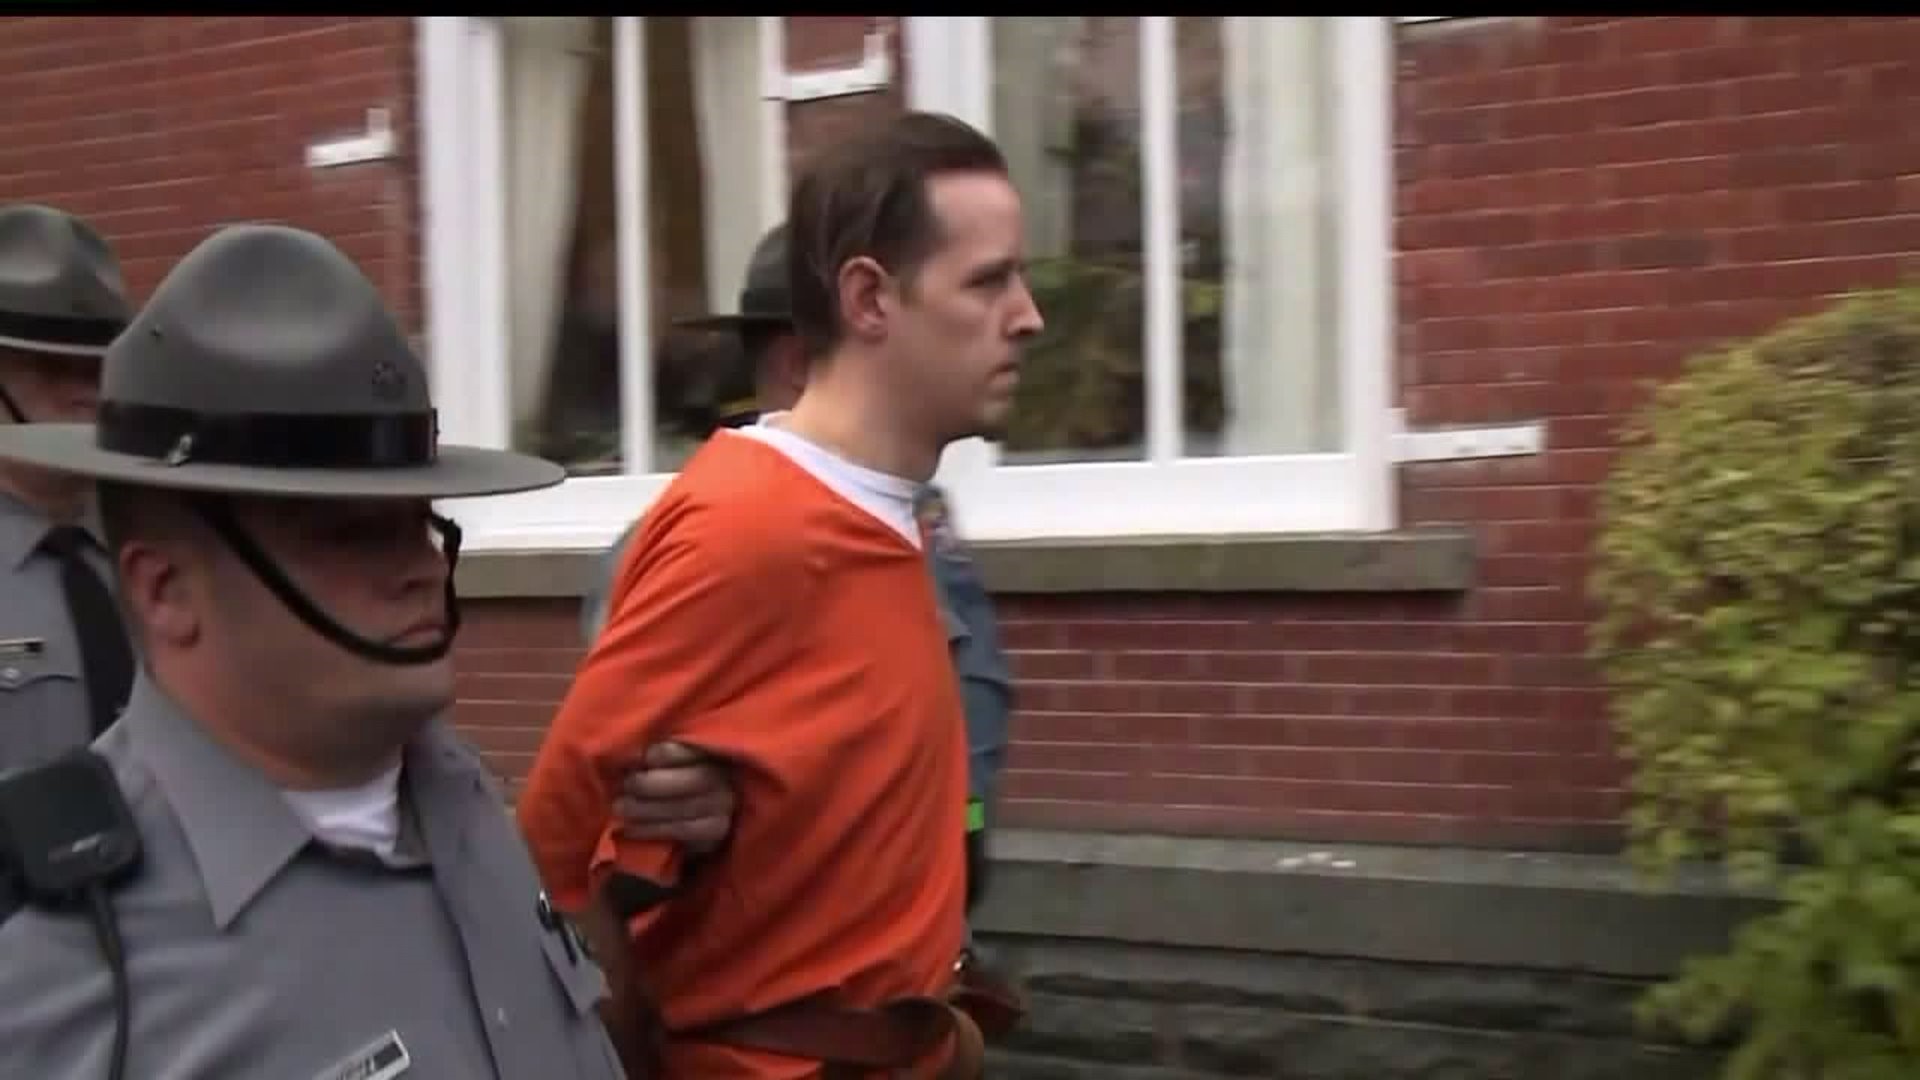 Opening statements expected to get underway this morning in the trial of accused trooper killer Eric Frein